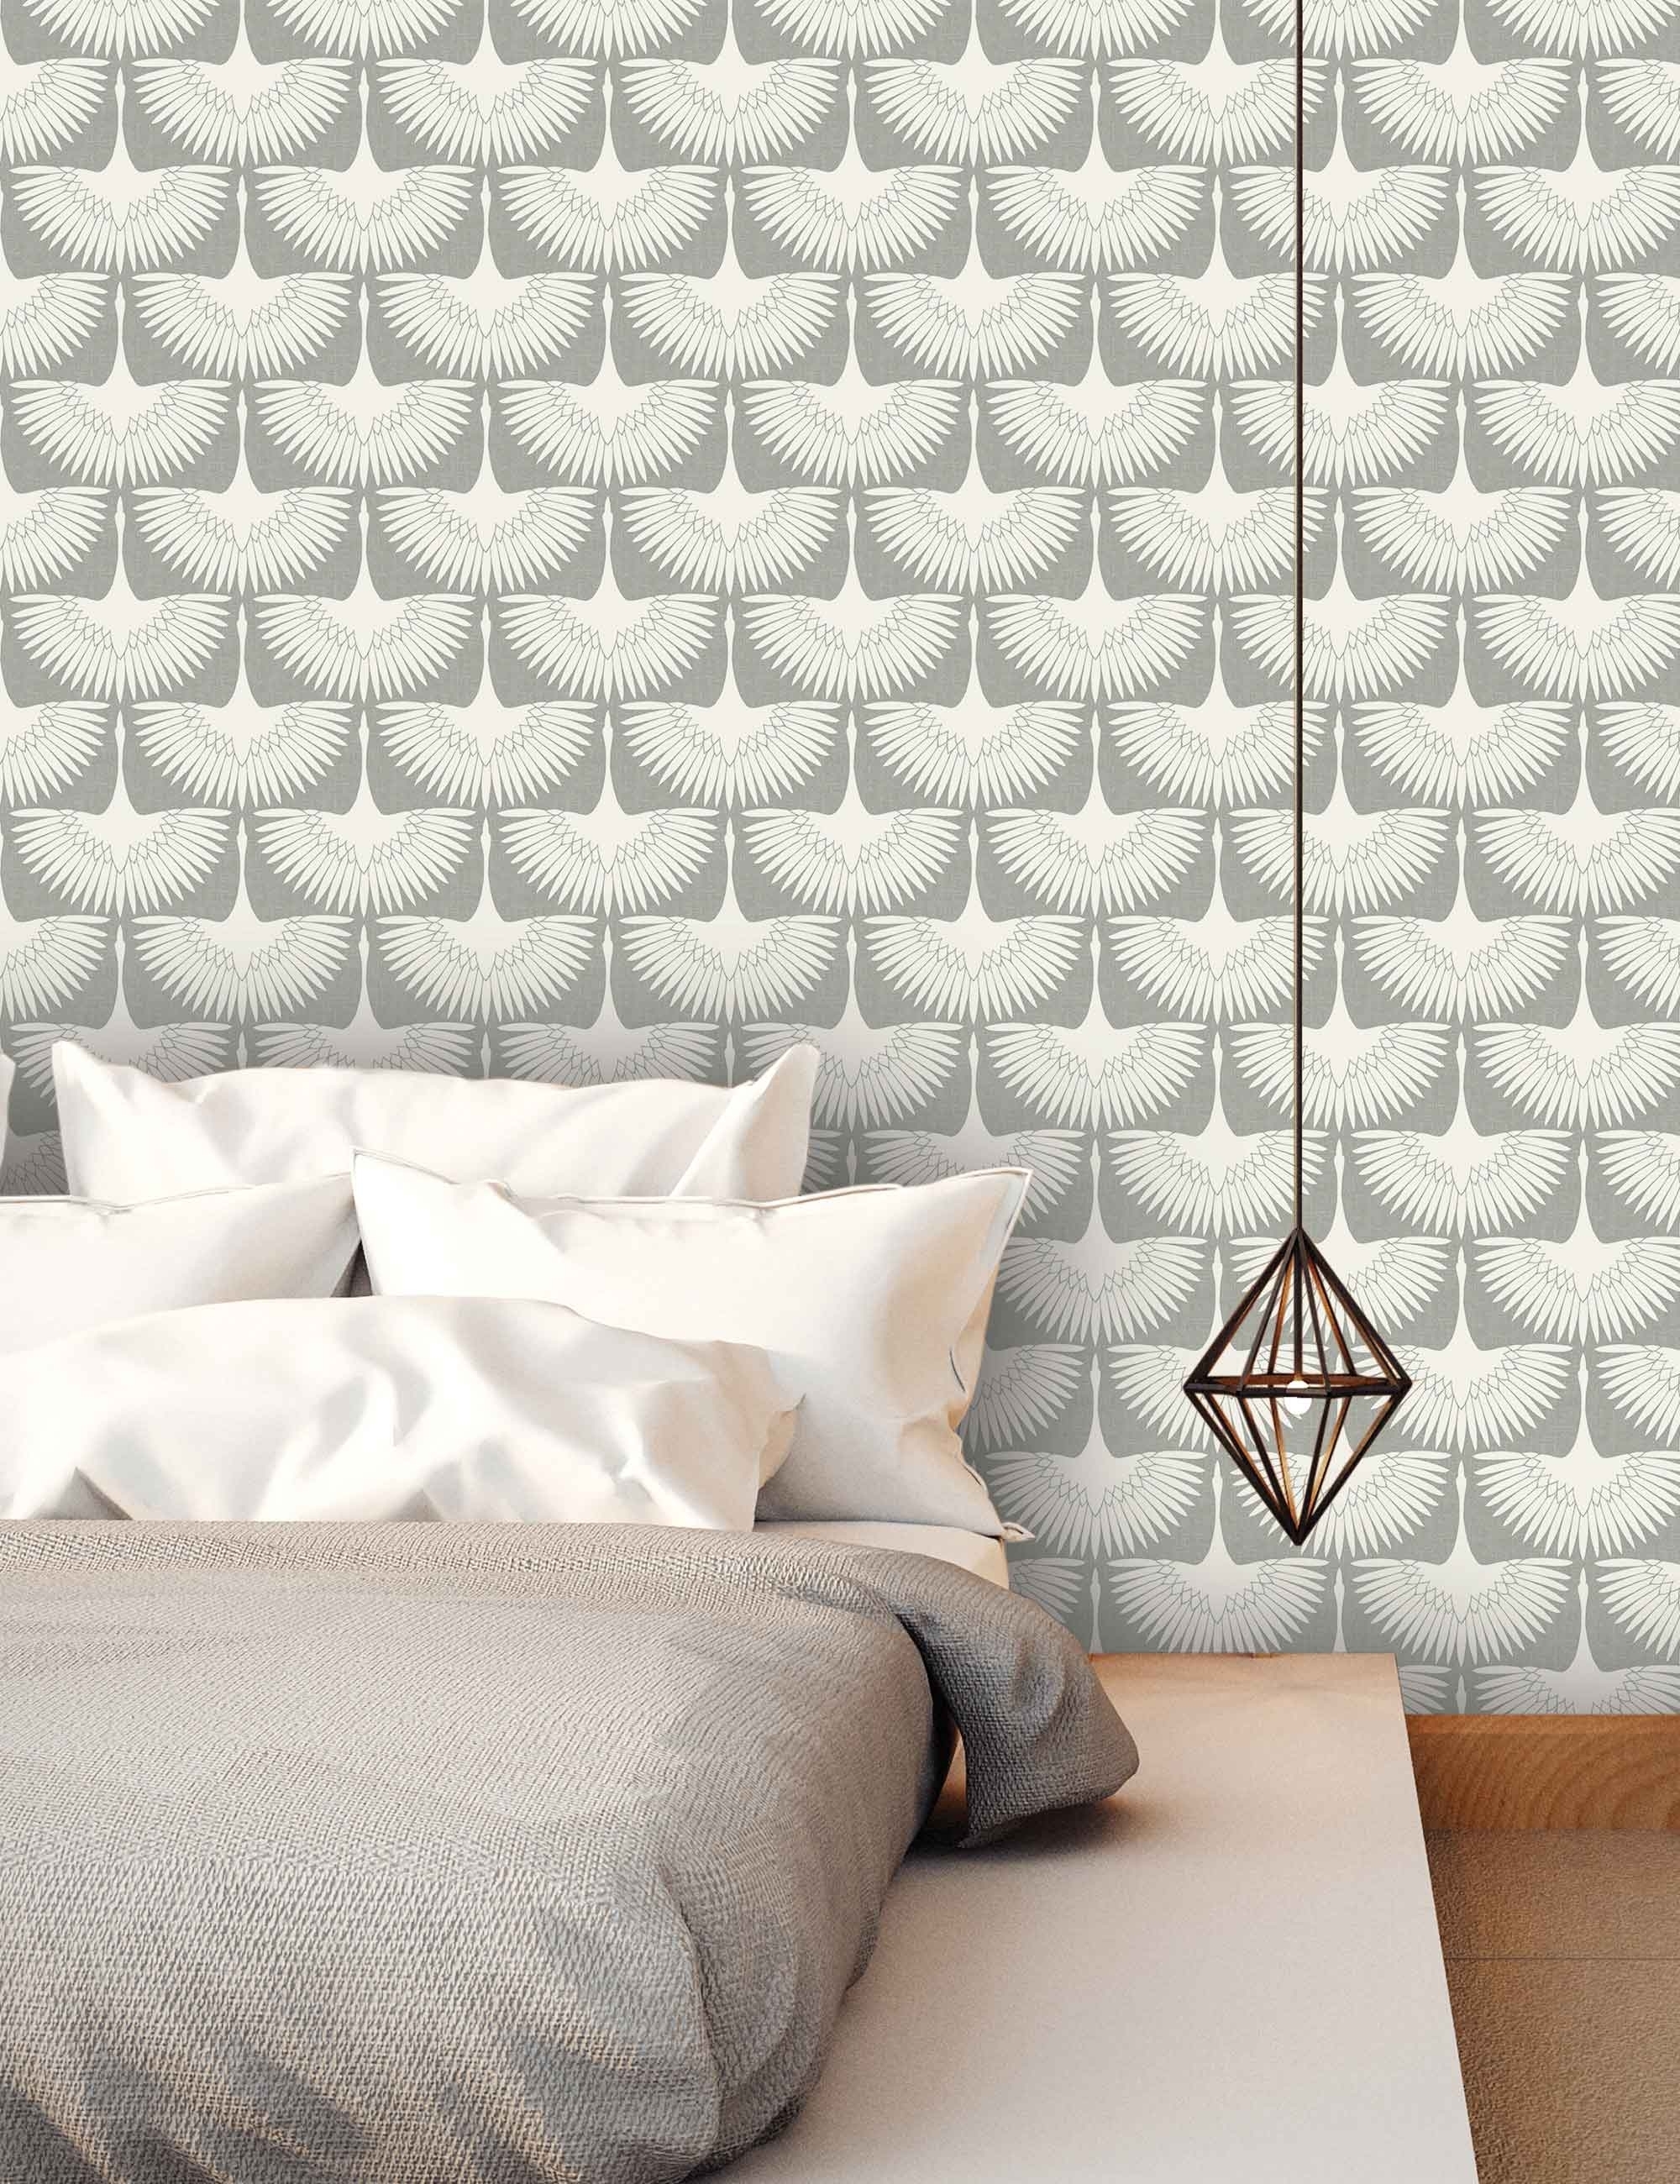 Feathered Removable Wallpaper, White - Image 1